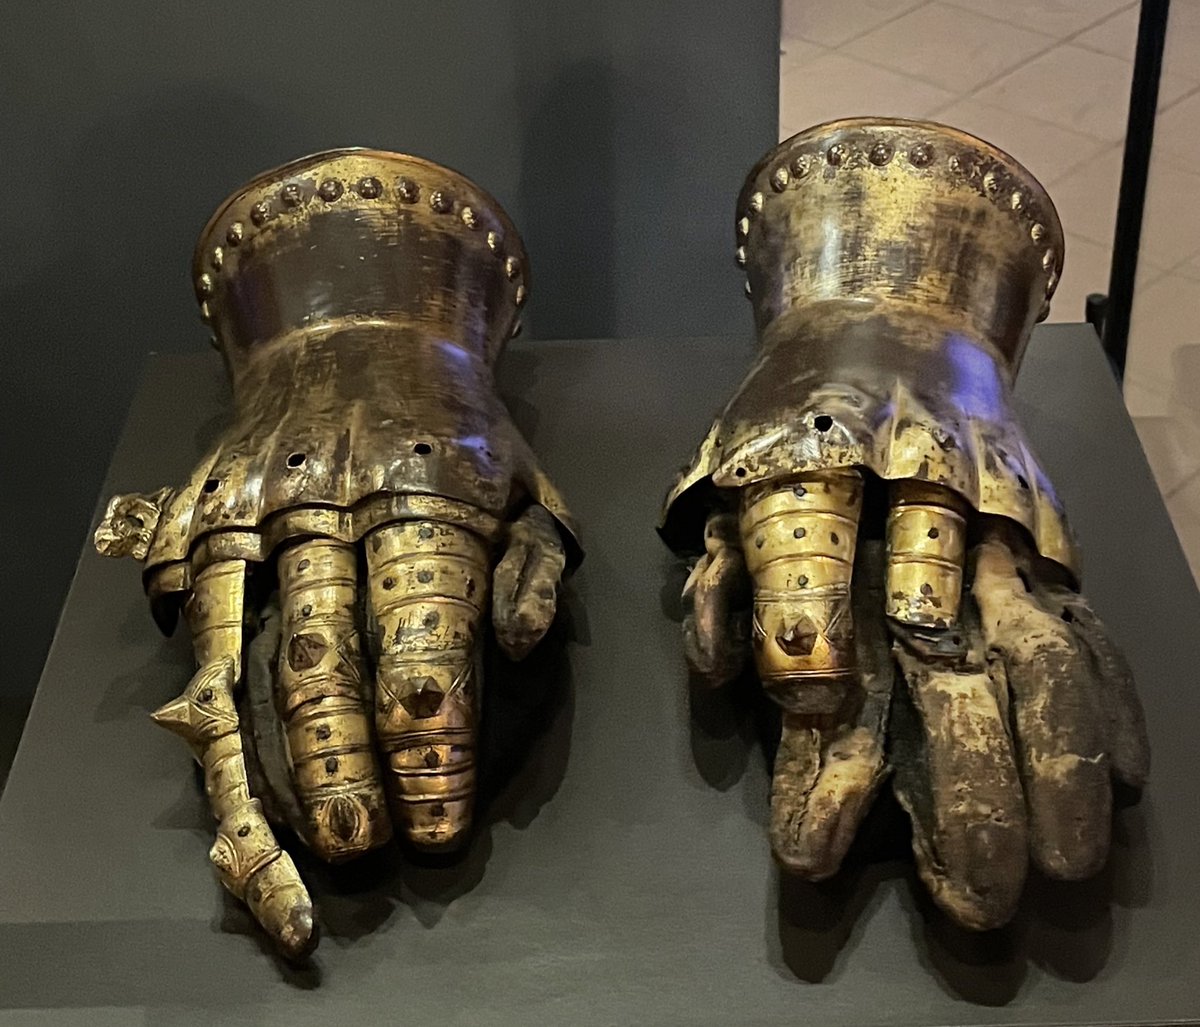 On temporary display in the crypt at Canterbury: Edward the Black Prince's gauntlets, originally studded with miniature lions on the knuckles (only one survives) - 14th century. F***ing terrifying.